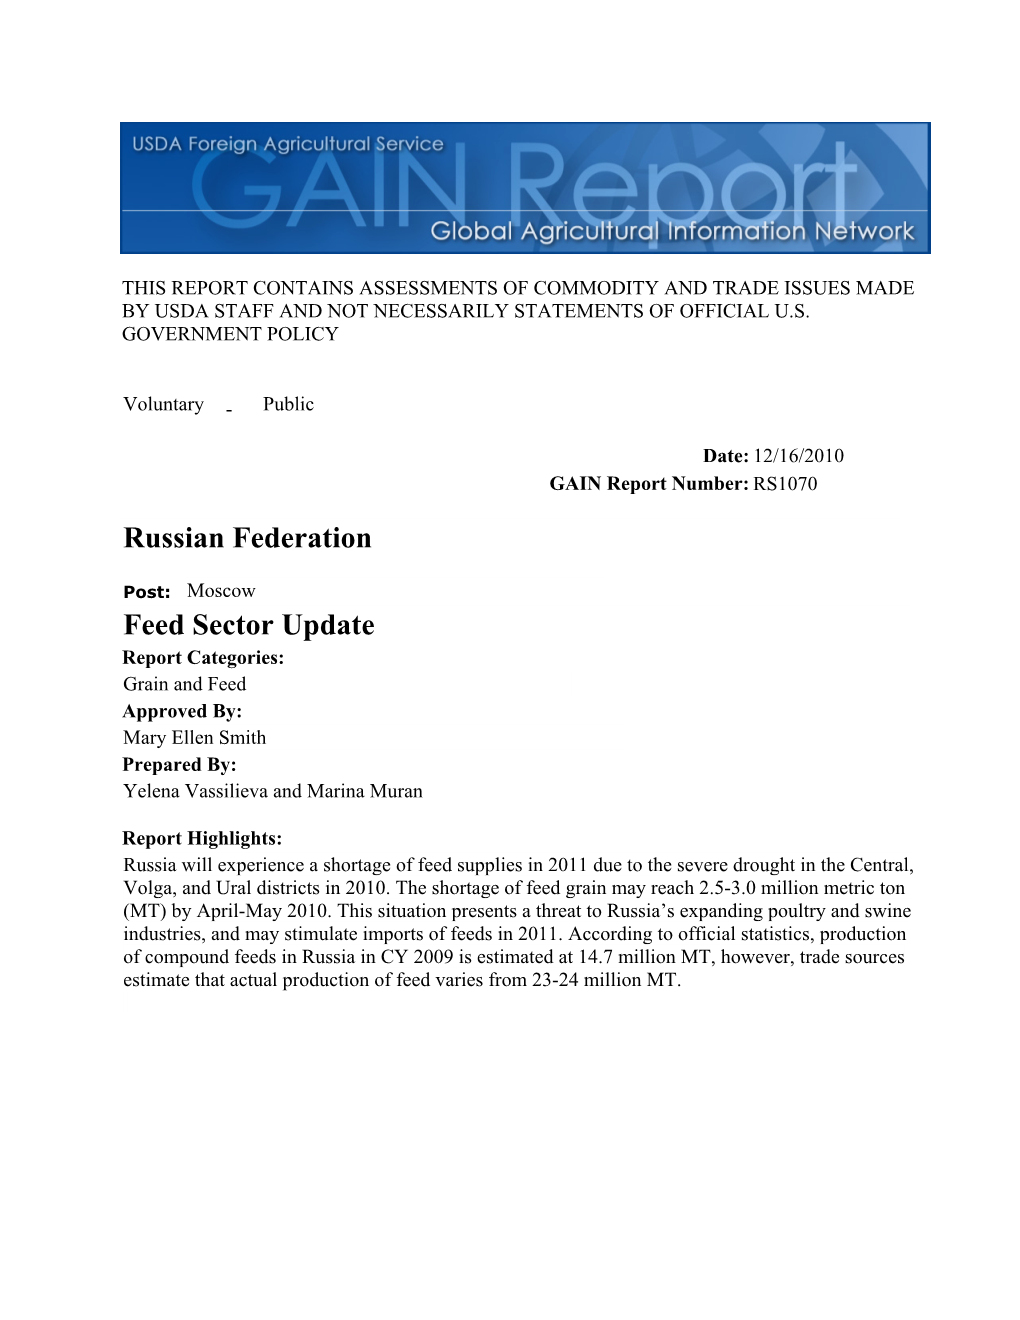 Feed Sector Update Russian Federation